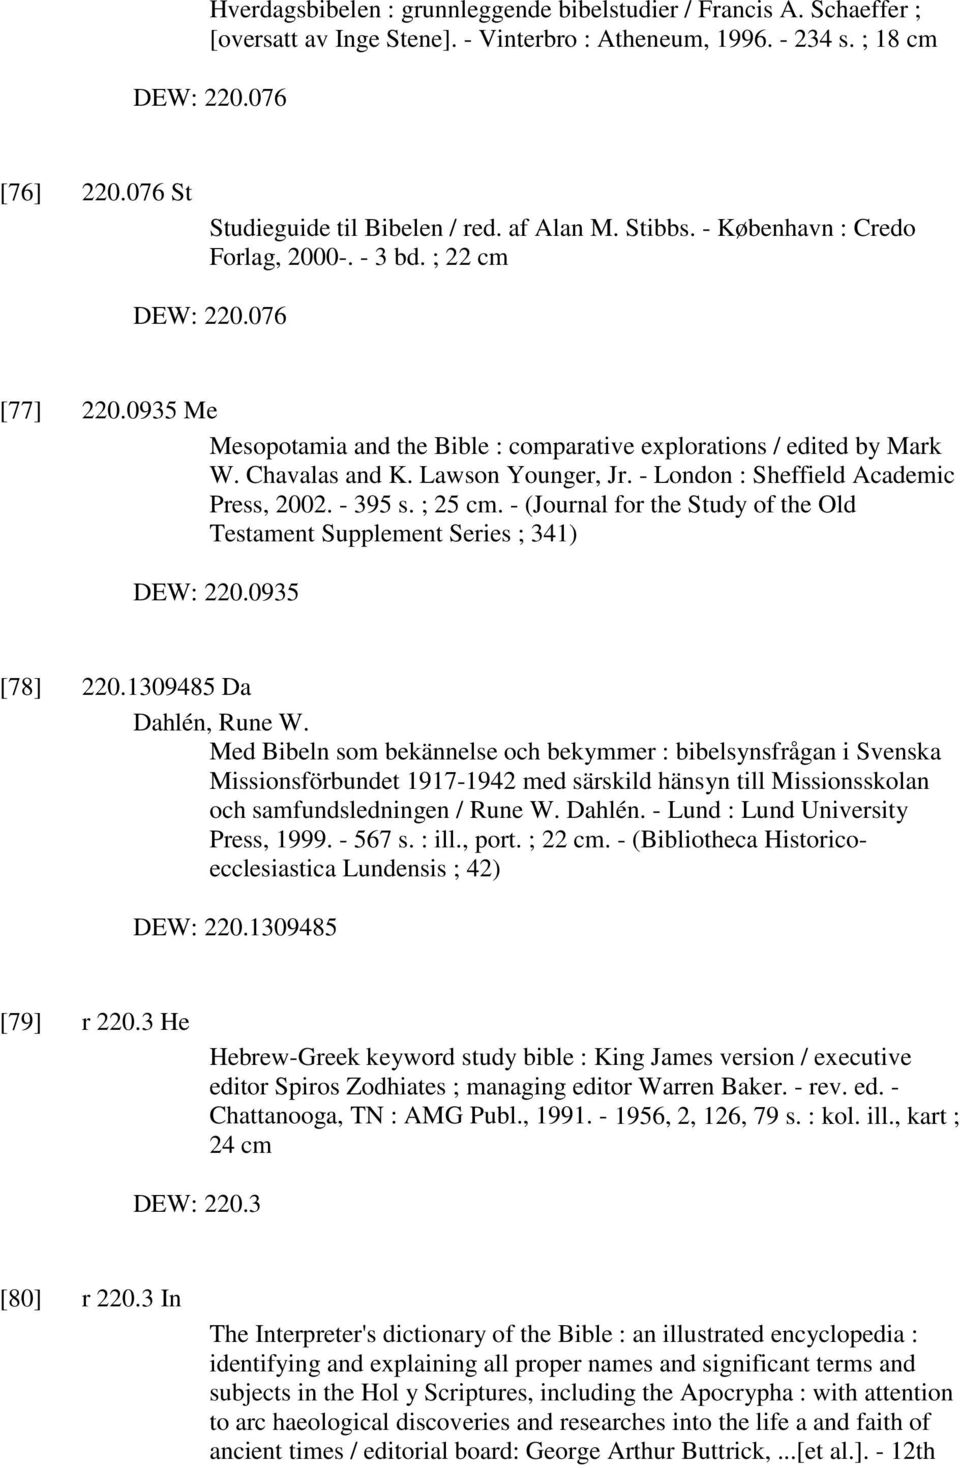 0935 Me Mesopotamia and the Bible : comparative explorations / edited by Mark W. Chavalas and K. Lawson Younger, Jr. - London : Sheffield Academic Press, 2002. - 395 s. ; 25 cm.